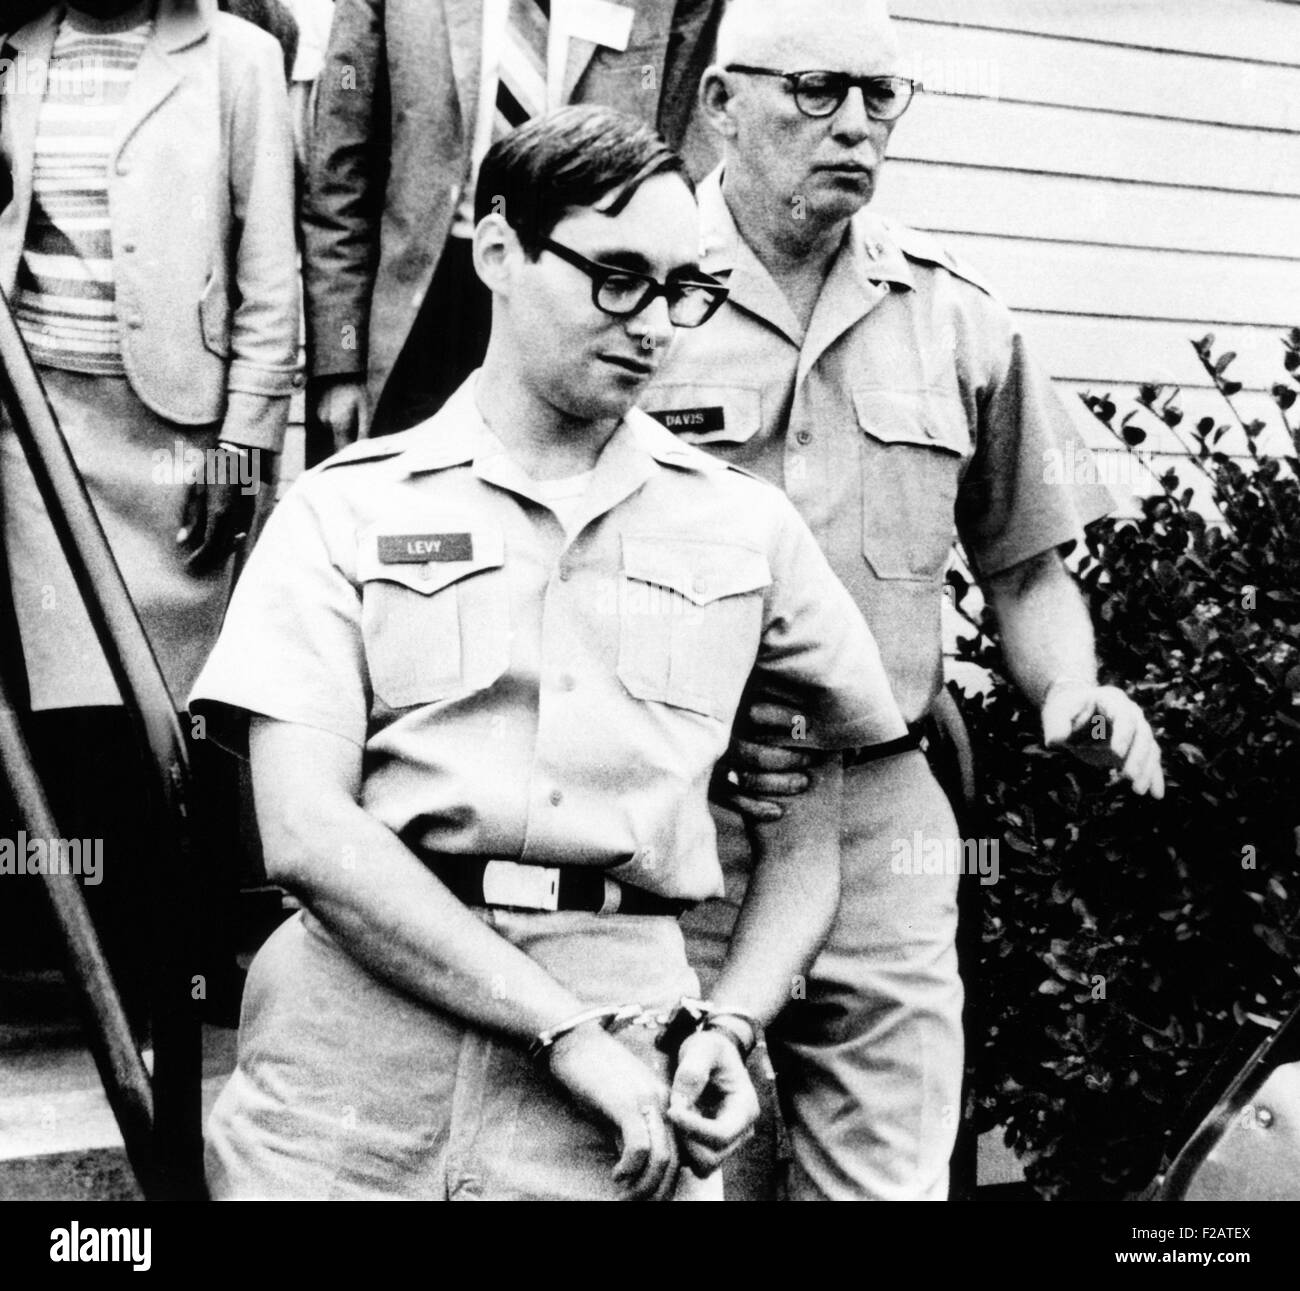 Anti-war Army Capt. Howard Brett Levy handcuffed after receiving a 3 year sentence. June 3, 1967. Dr. Levy, a civil rights and anti-war activist, was convicted of making disloyal statements and disobeying an order. Trained as a dermatologist, he refused to train Special Forces troops who he believed would use their training for 'criminal purposes.' After he served 26 months, he joined the 'GI Coffee House Protests.' In 2015 he had a medical practice in Bronx, New York. (CSU 2015 11 1670) Stock Photo